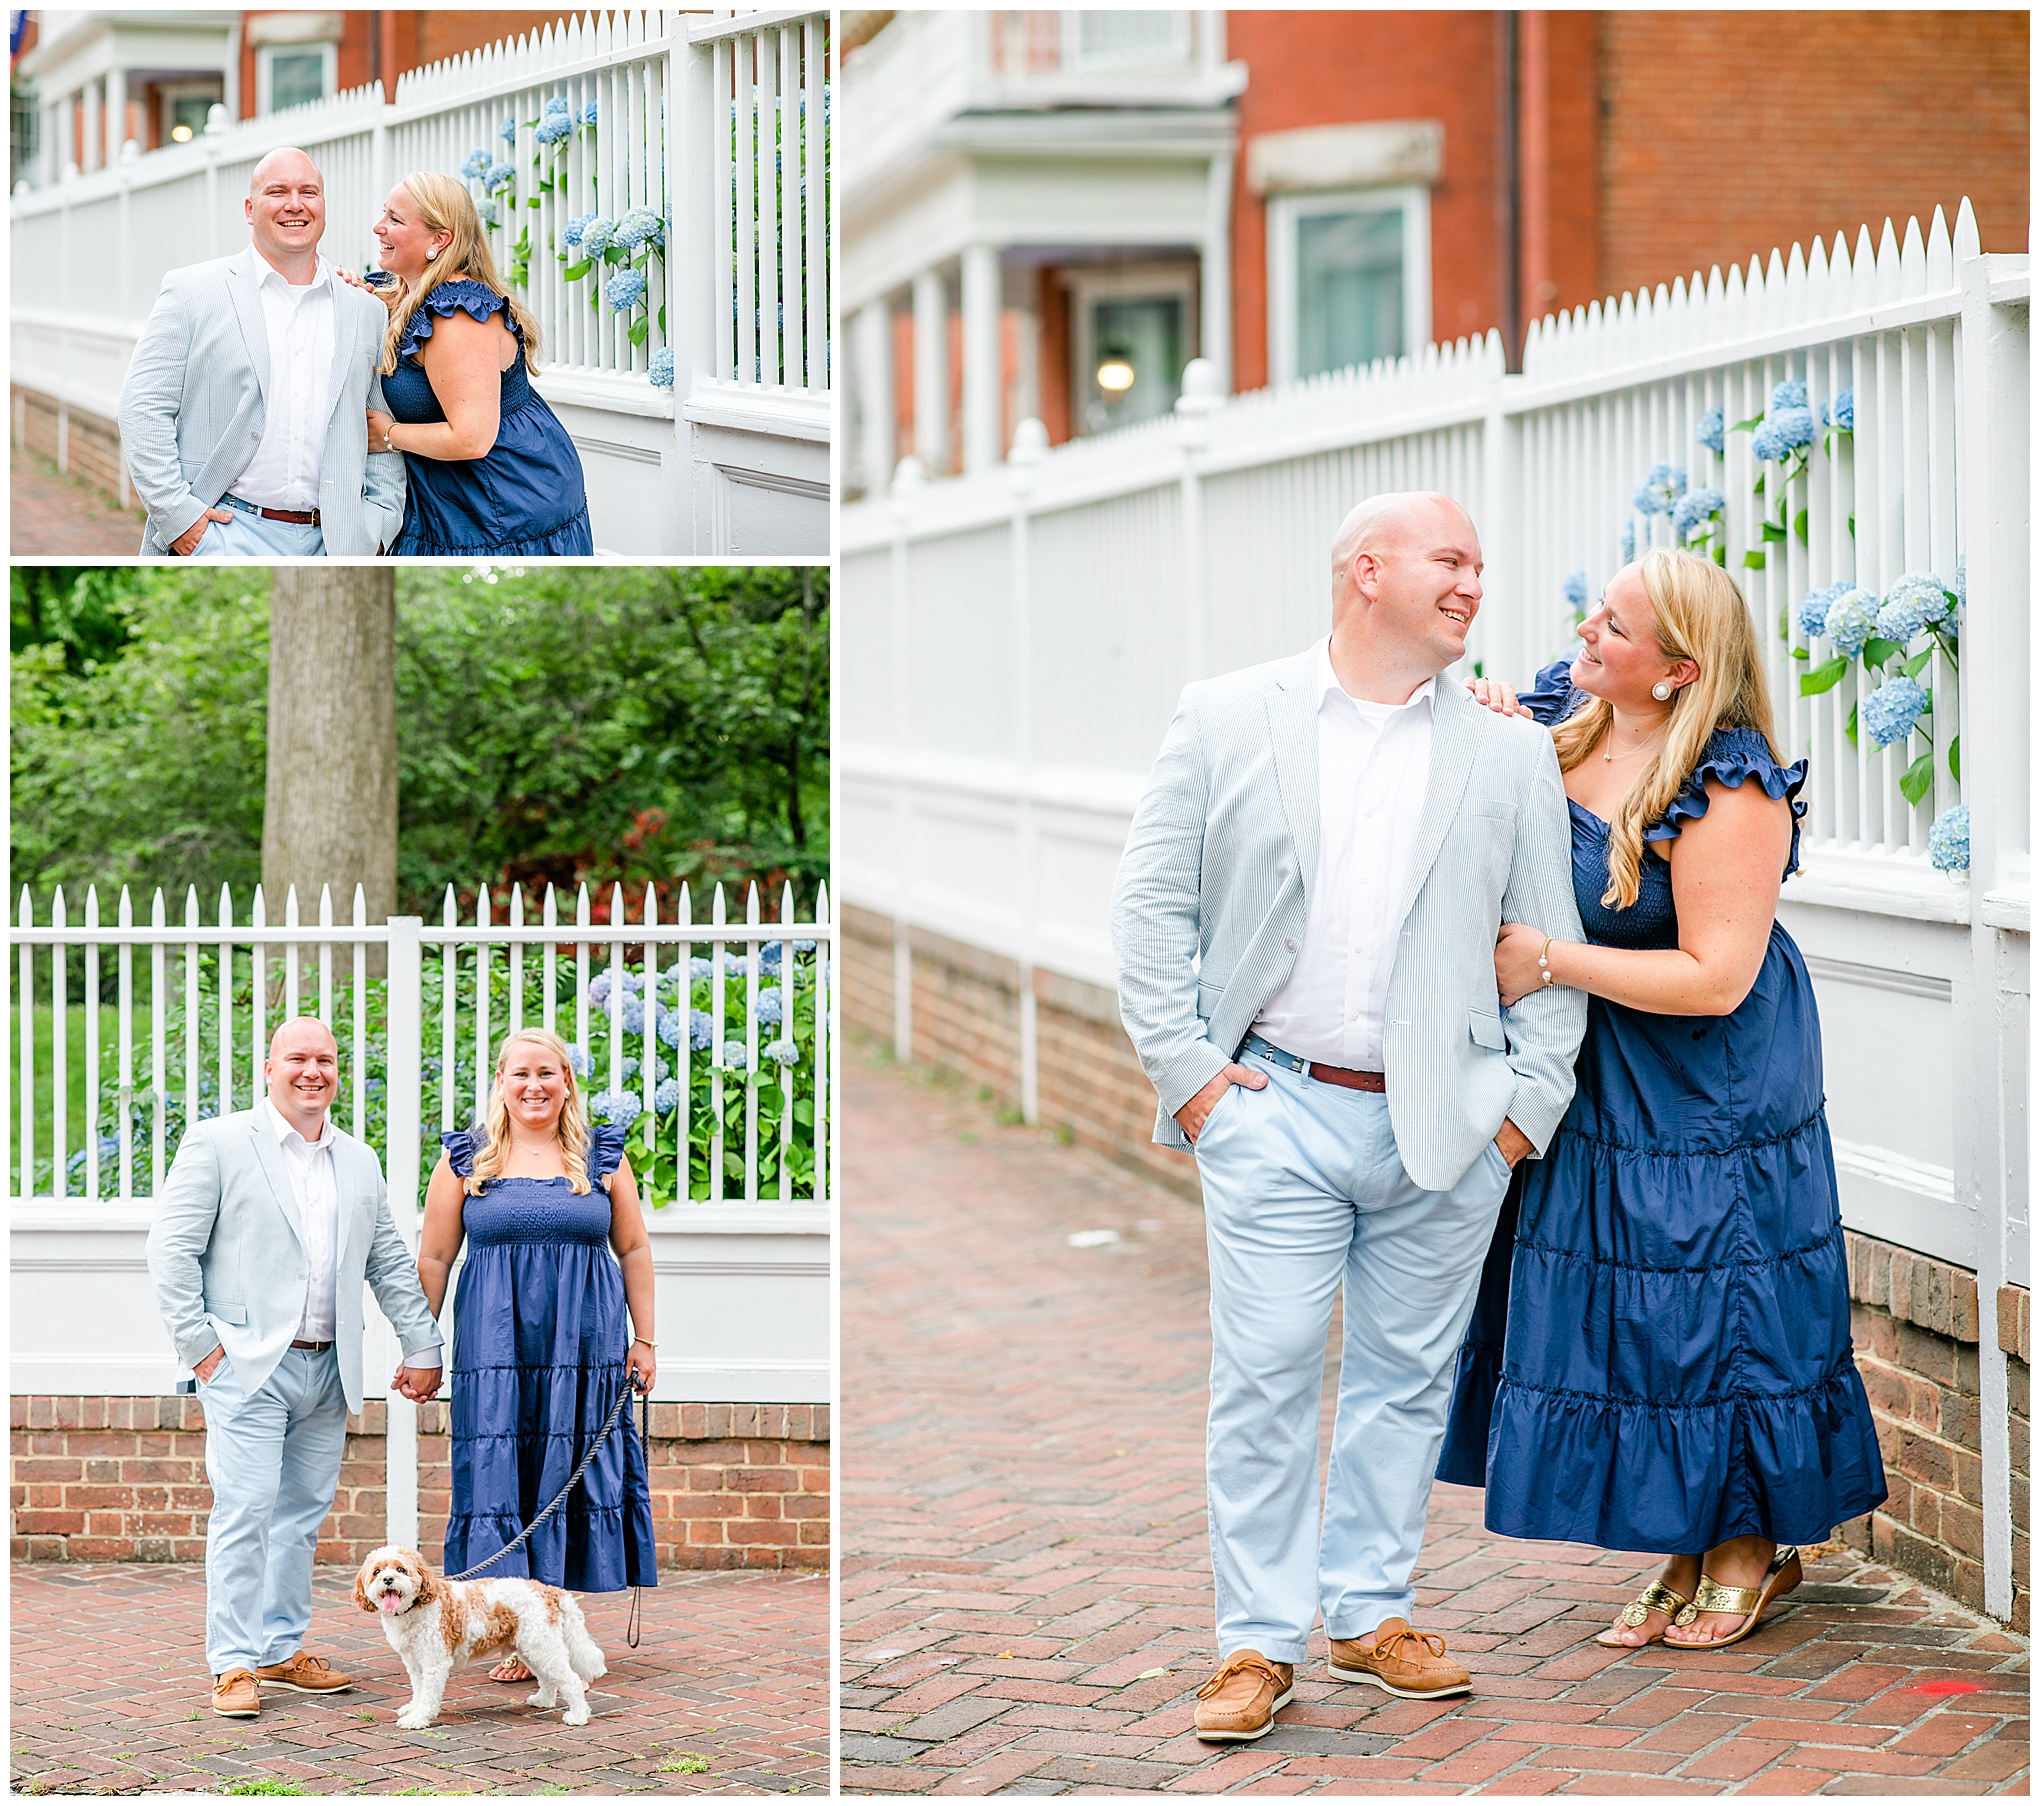 late spring Annapolis engagement photos, nautical engagement photos, Annapolis Maryland, Maryland engagement photos, MD wedding photographer, MD engagement photos, all American engagement photos, downtown Annapolis engagement photos, Annapolis photographer, Rachel E.H. Photography, summer engagement photos, red white and blue aesthetic, blue hydrangea